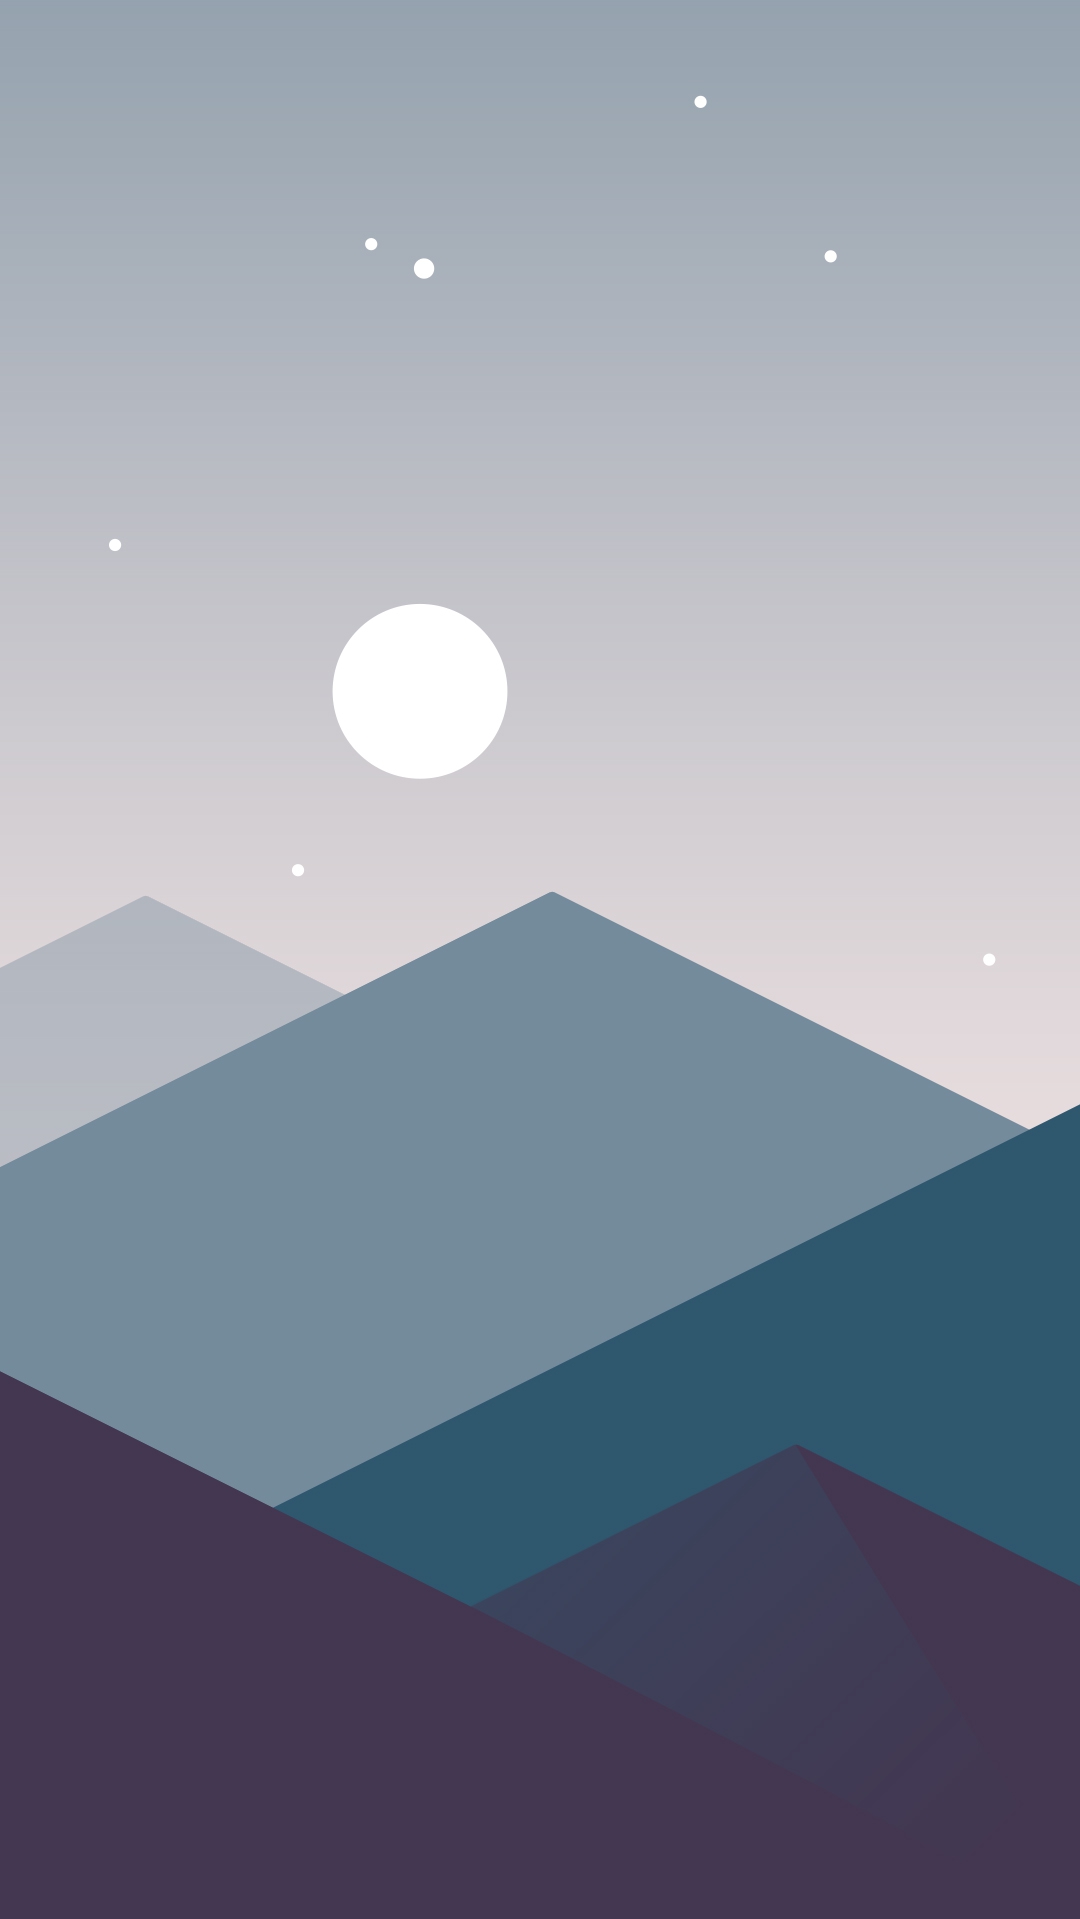 Minimalistic-Mountains-Night-Moon-iPhone-Wallpaper - iPhone Wallpapers